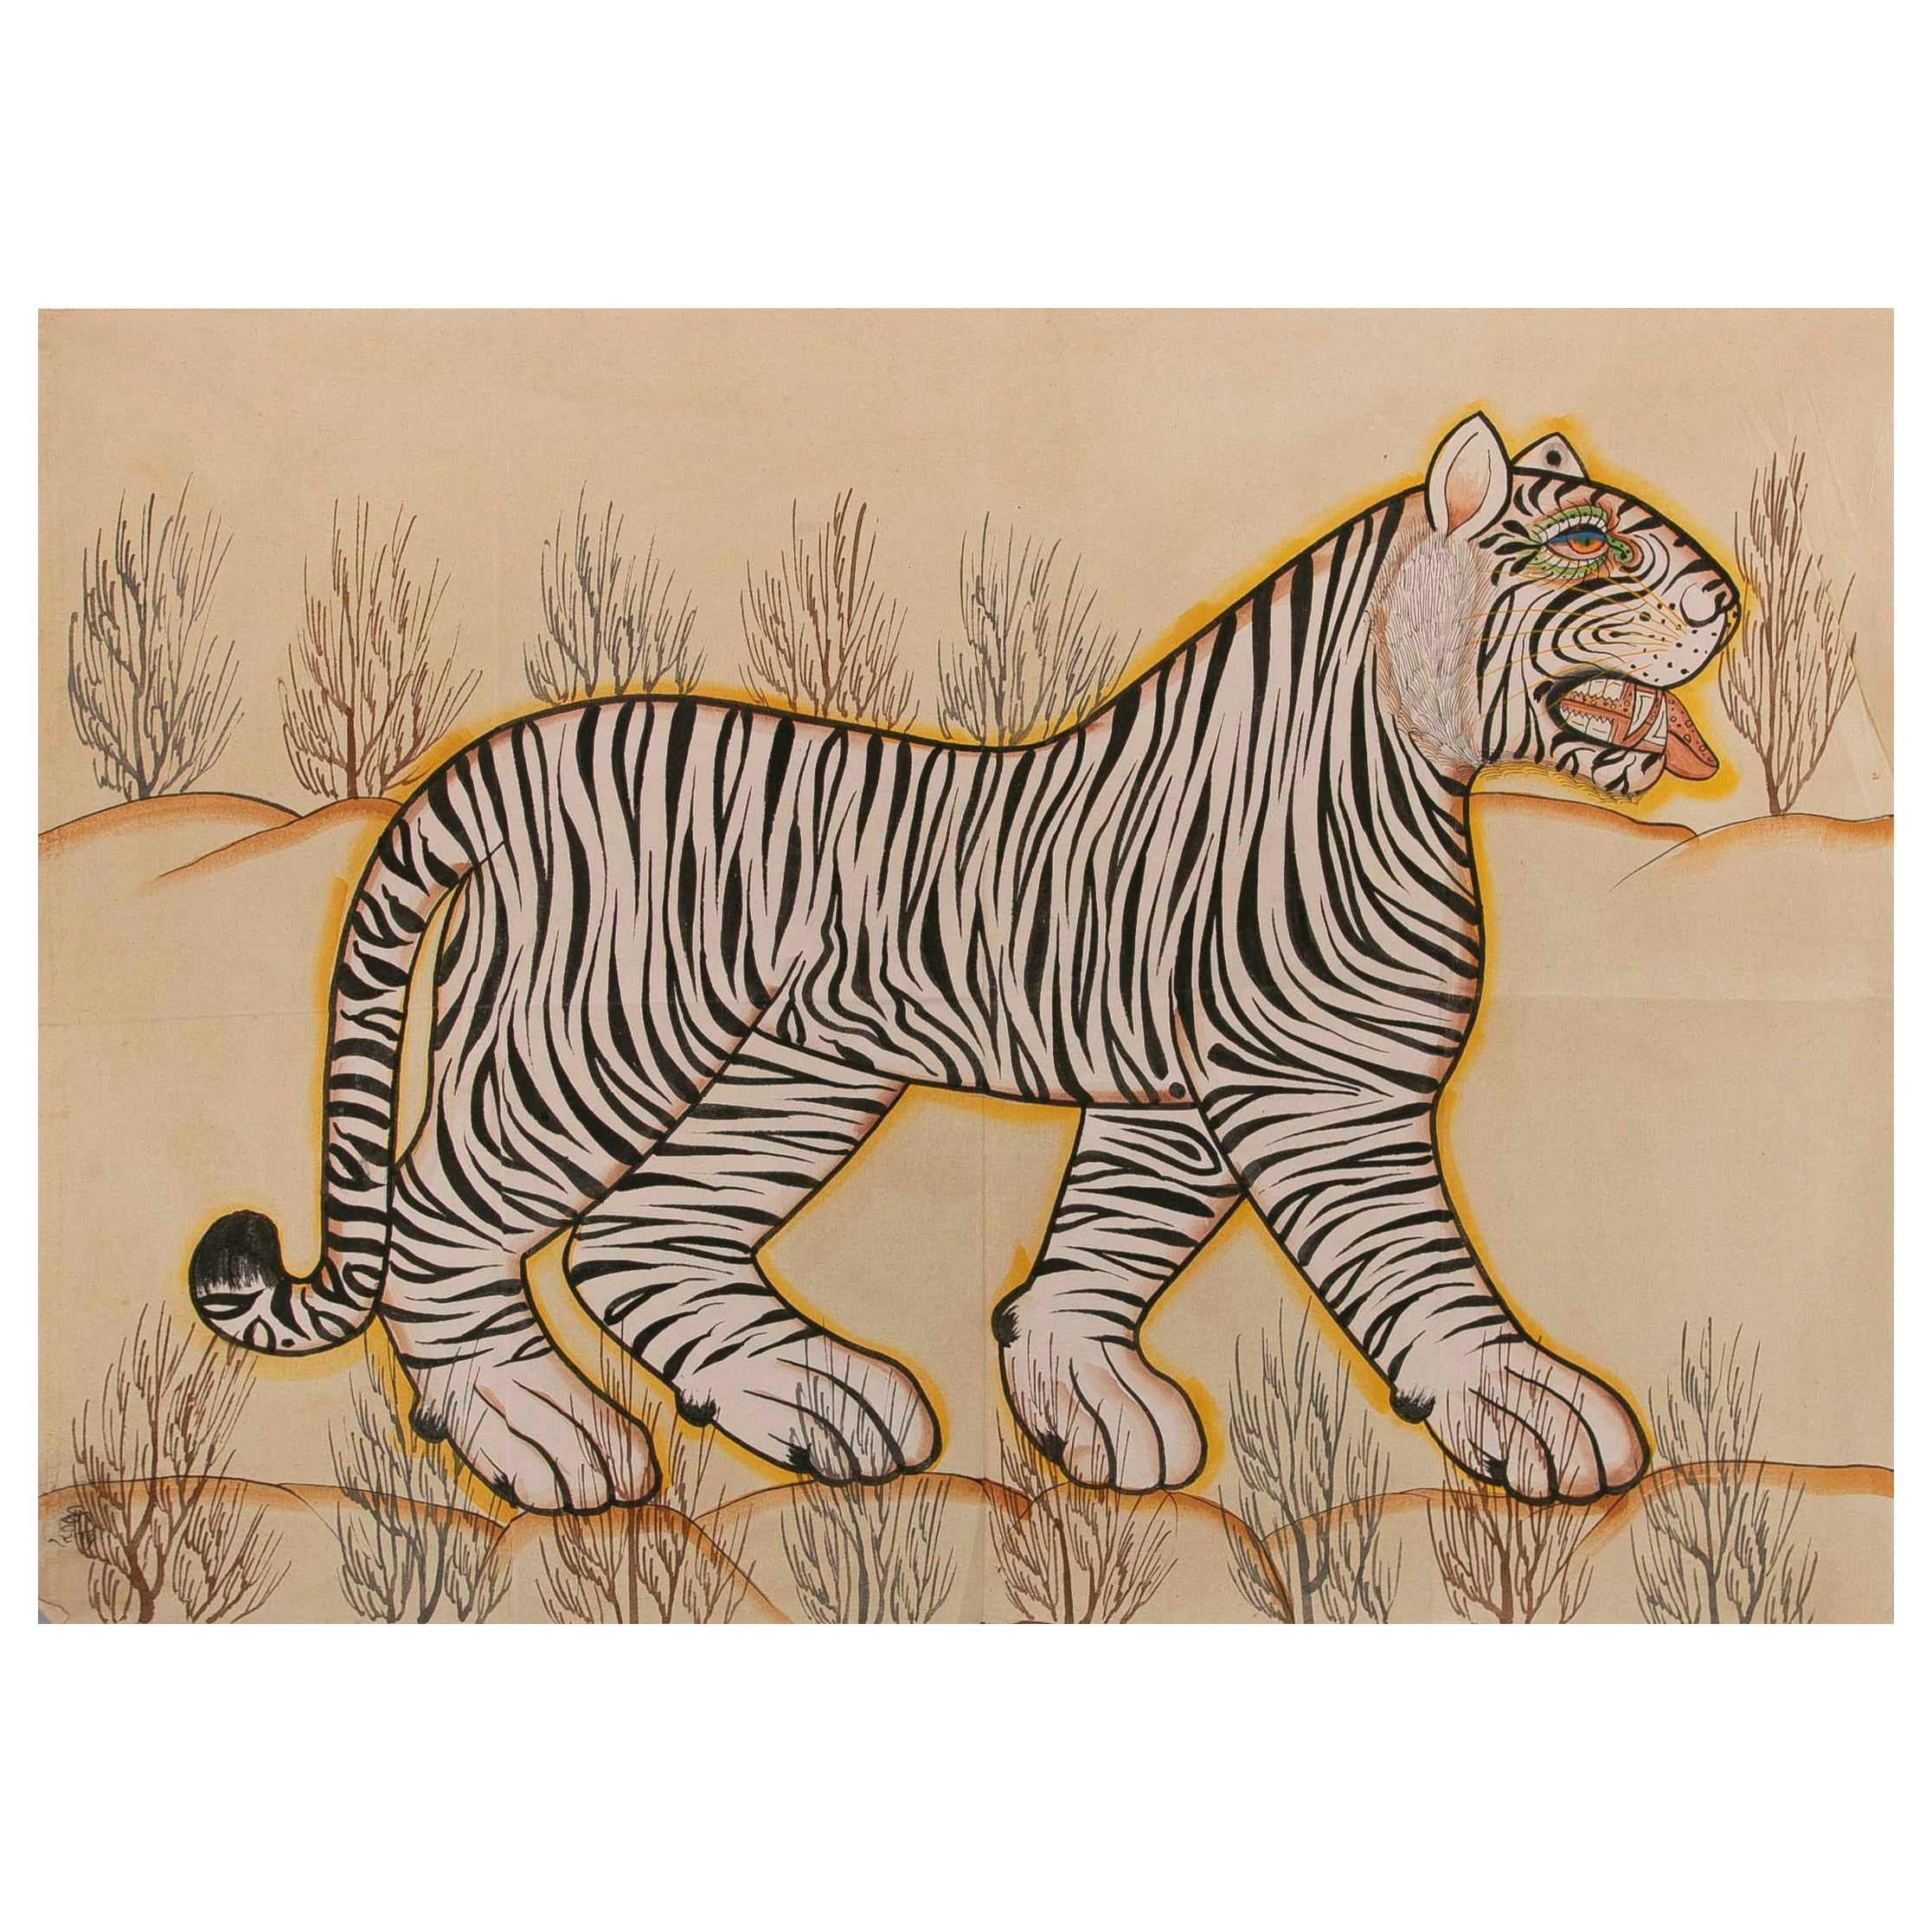 1970s Jaime Parlade Designer Hand Painting "Bengal Tiger" For Sale